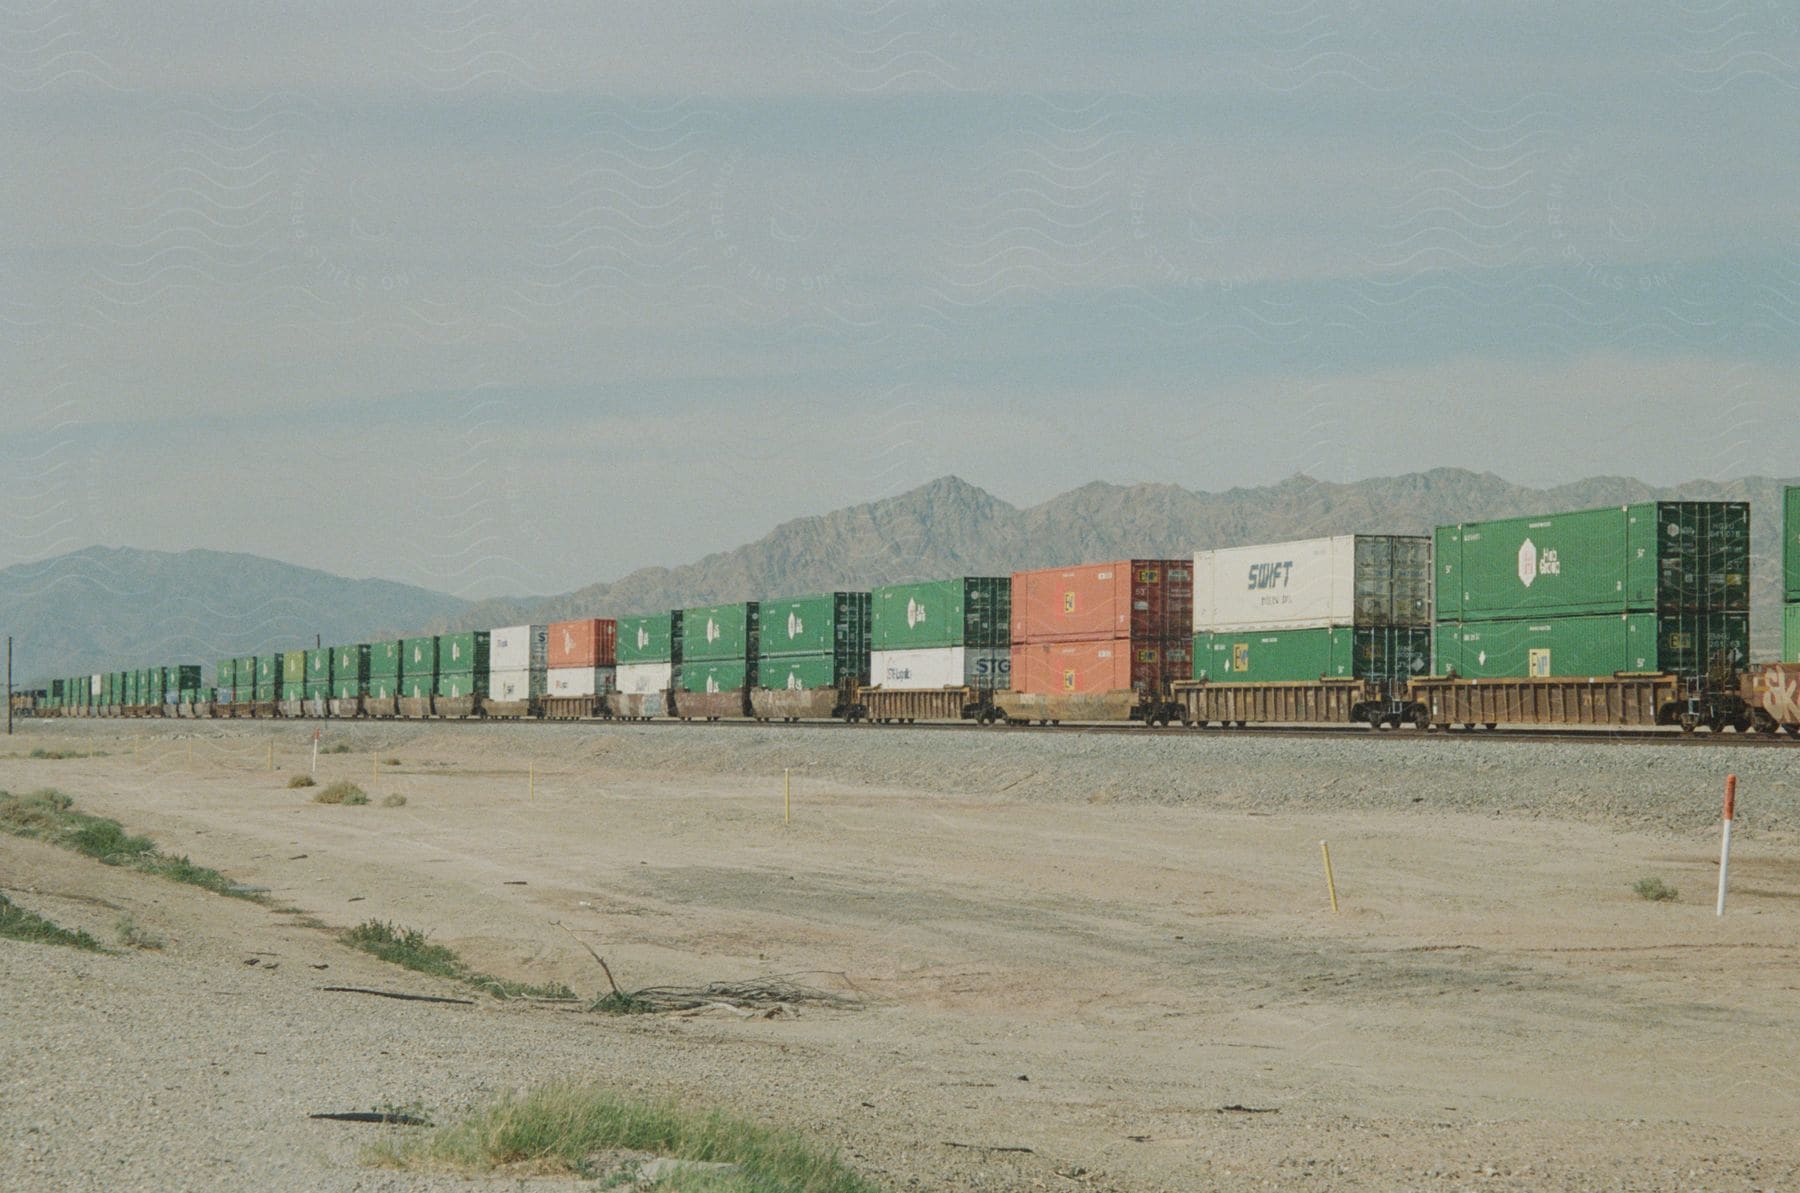 Long freight train with several colorful containers in a desert area with mountains in the background.